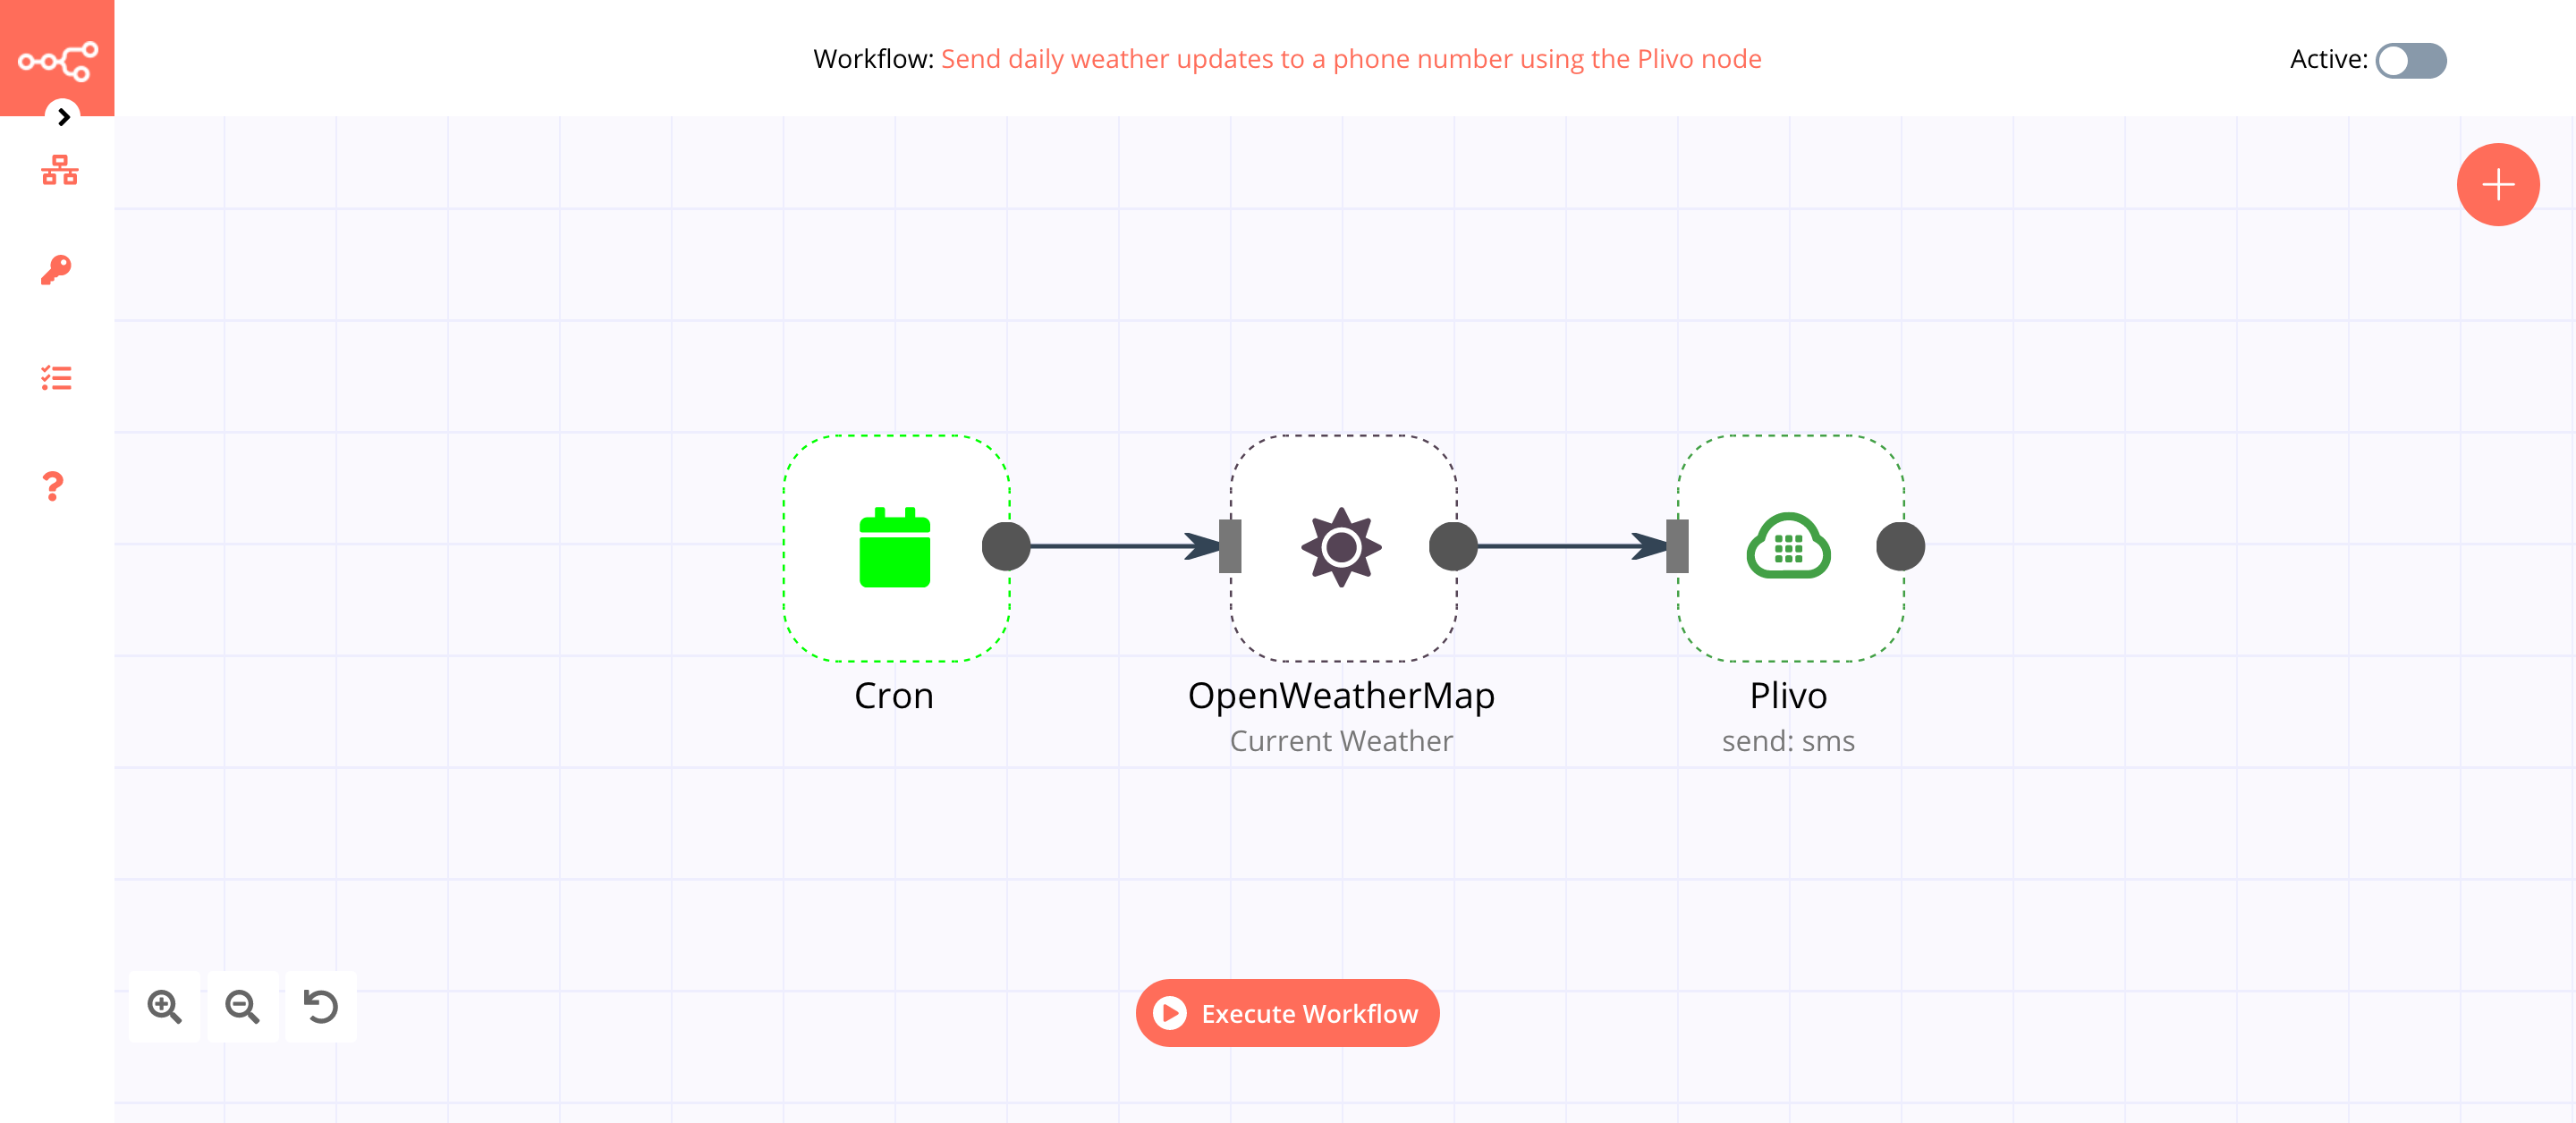 A workflow with the Plivo node